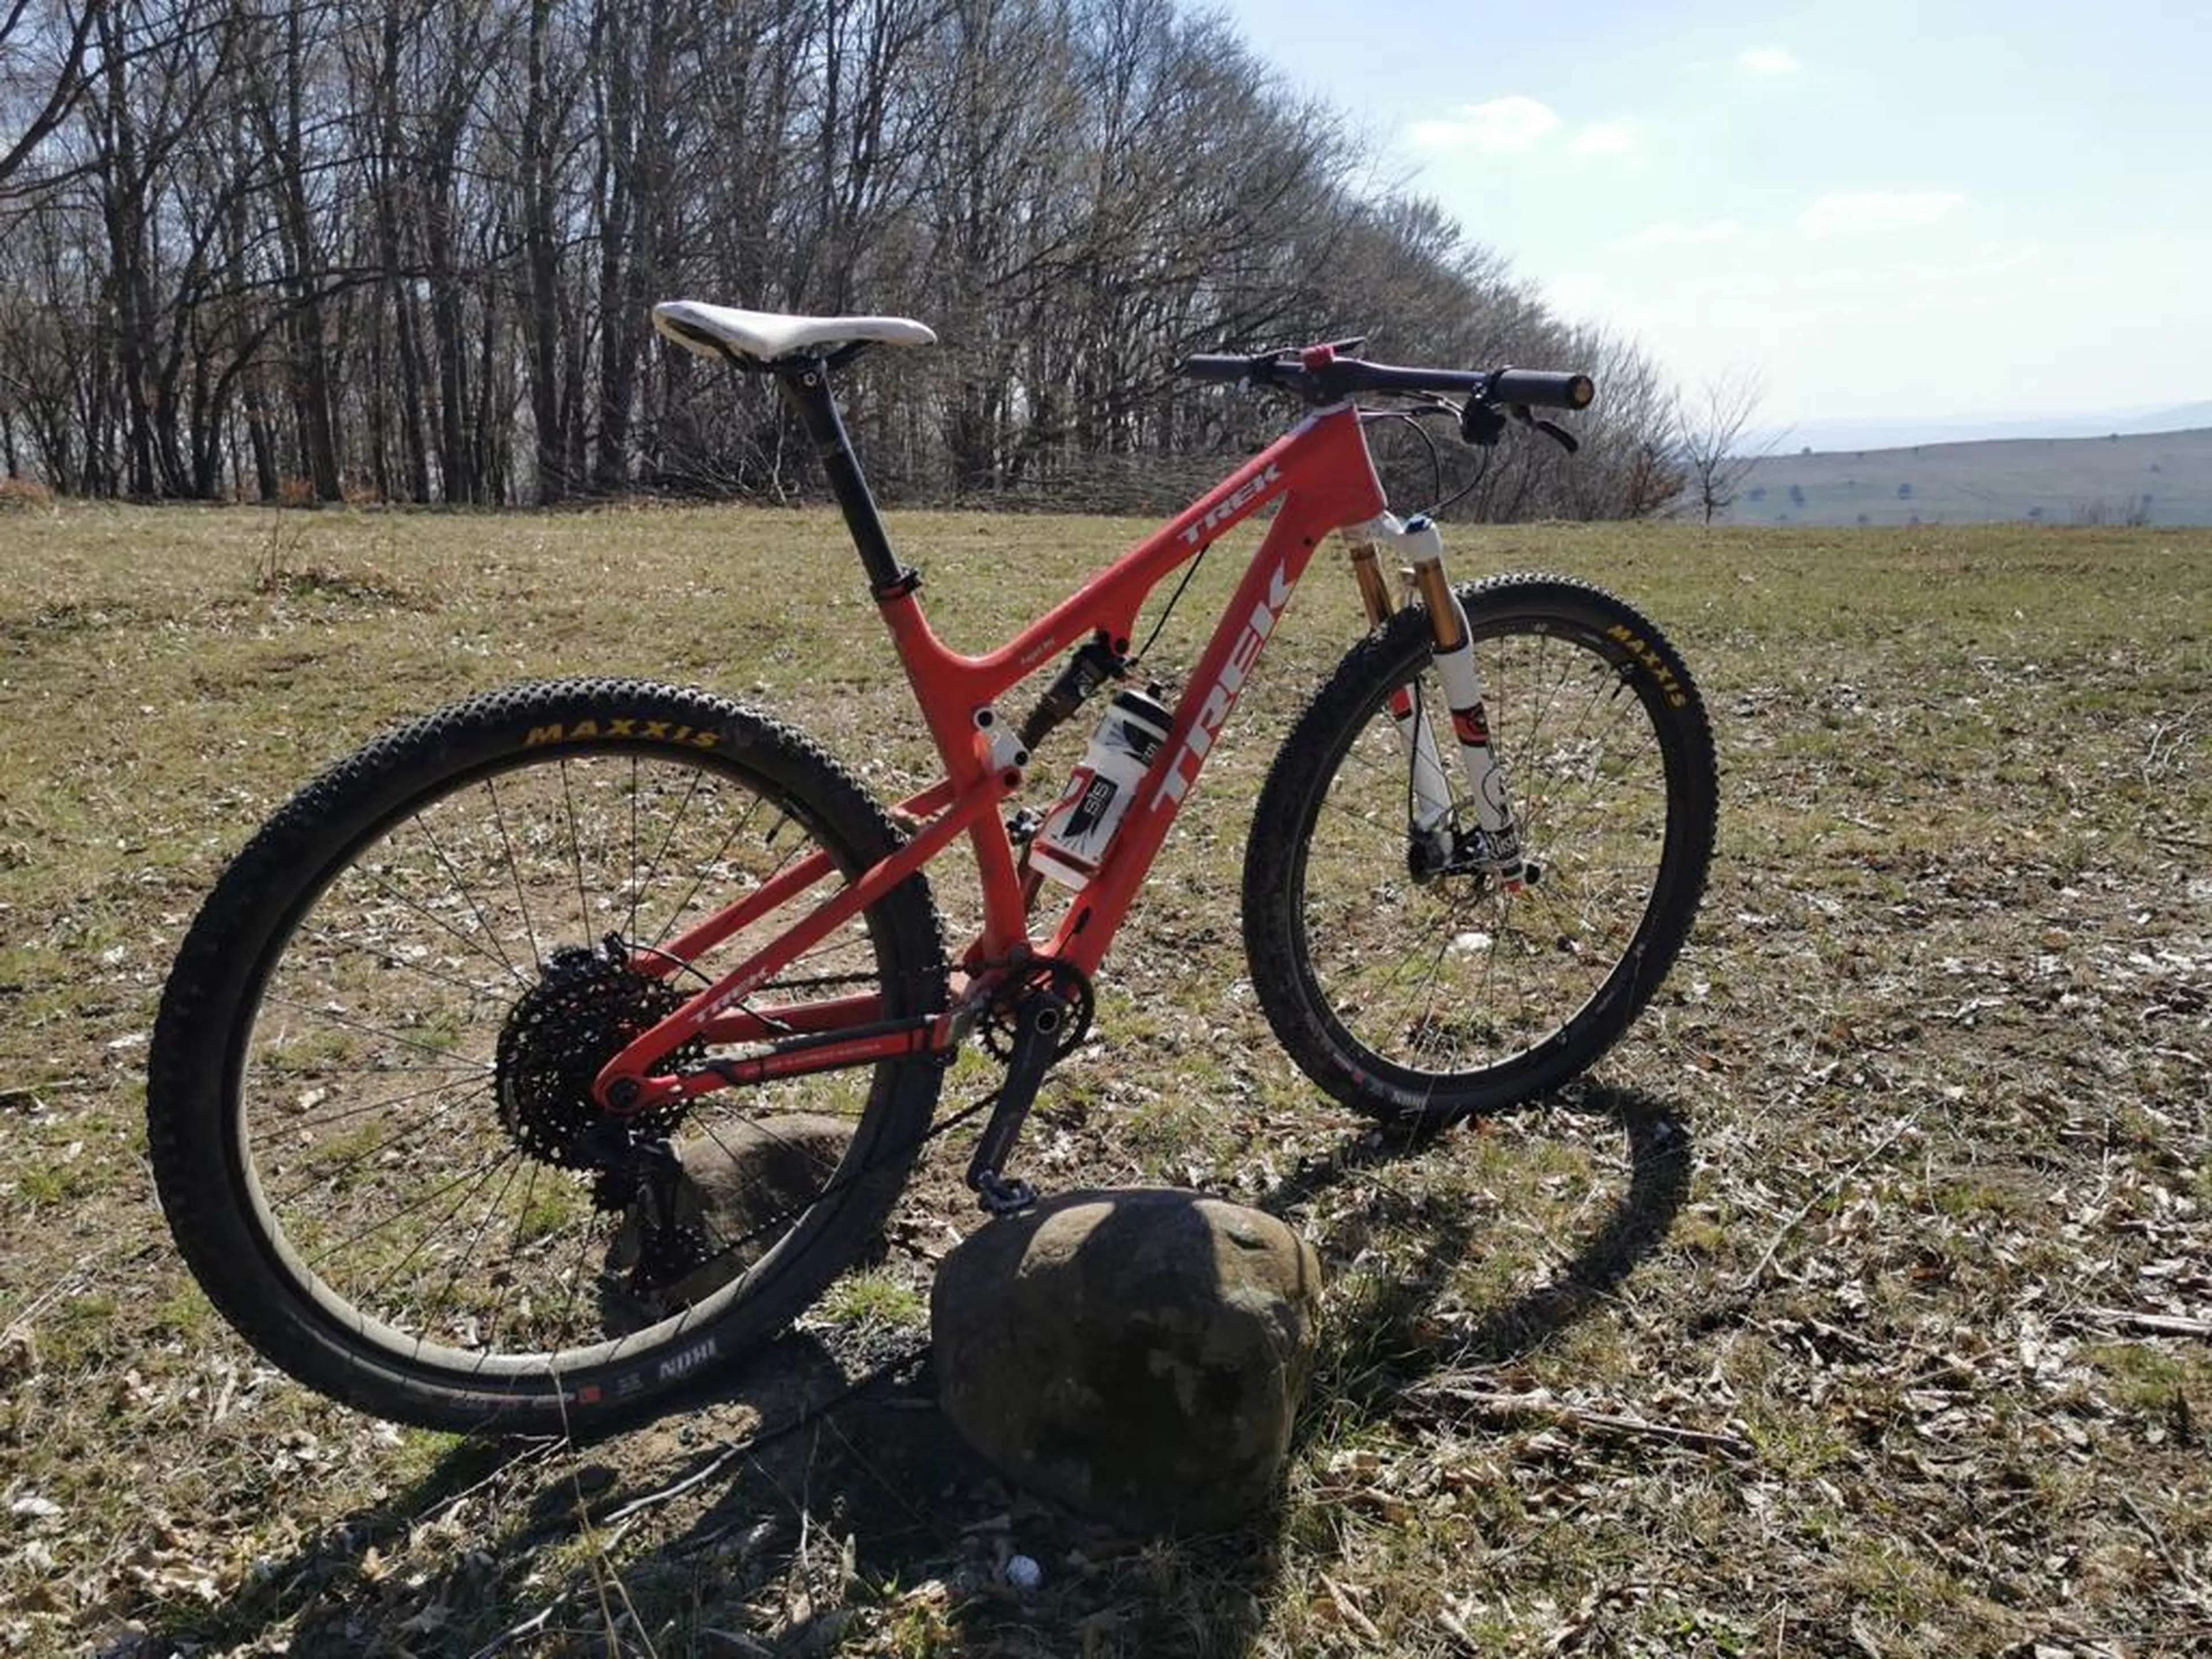 2. Trek Project One Superfly 9.9